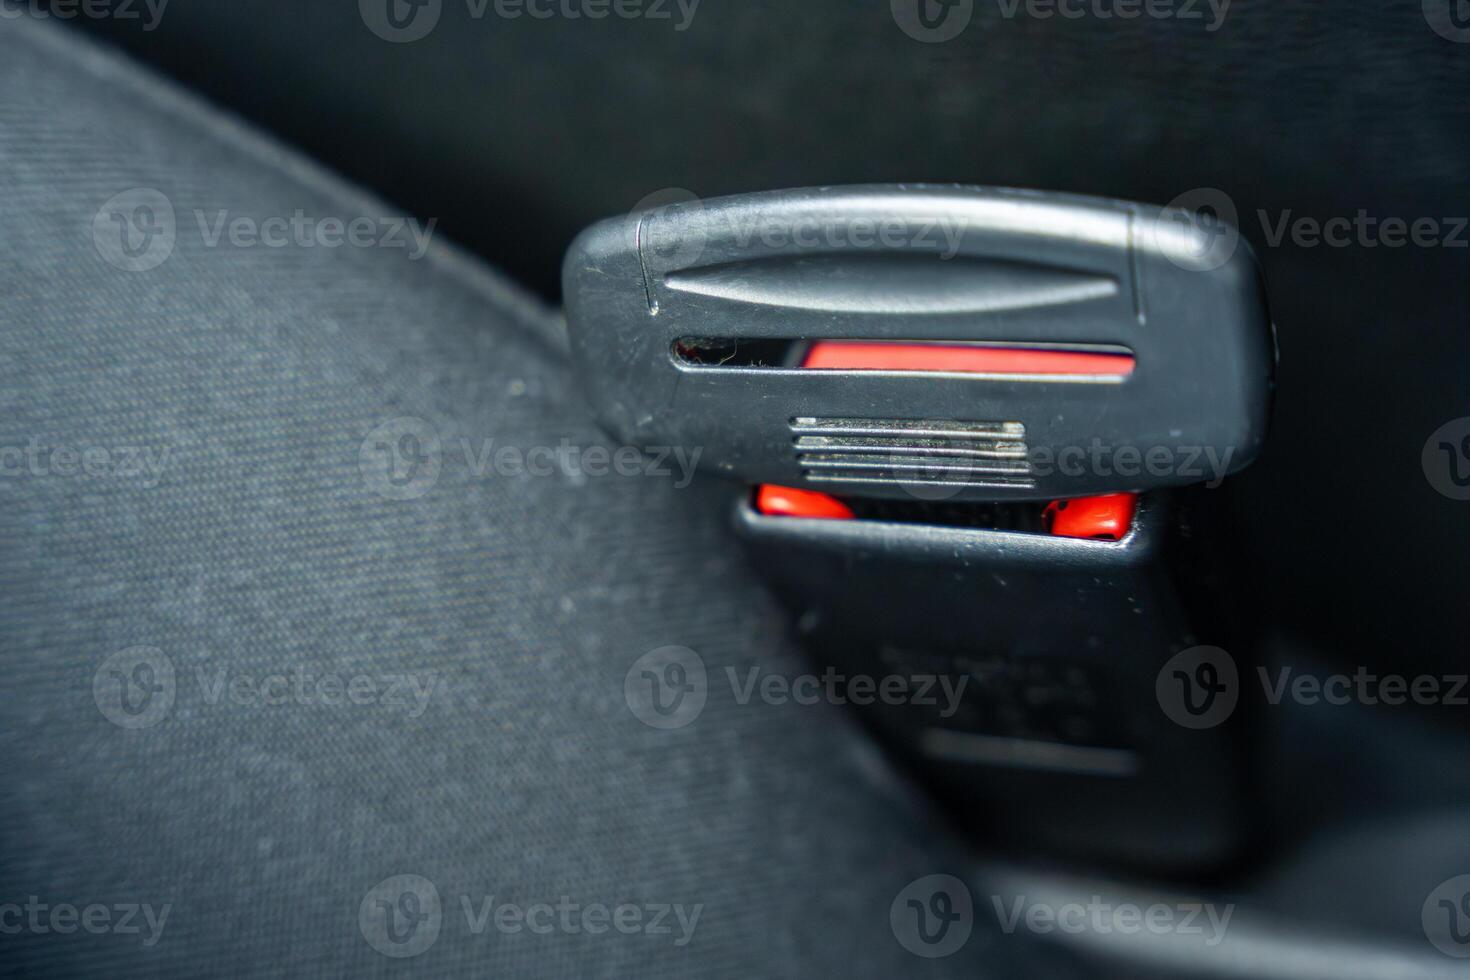 Artificial seat belt plug.Violation of traffic rules. Irresponsible driving and behavior concept photo